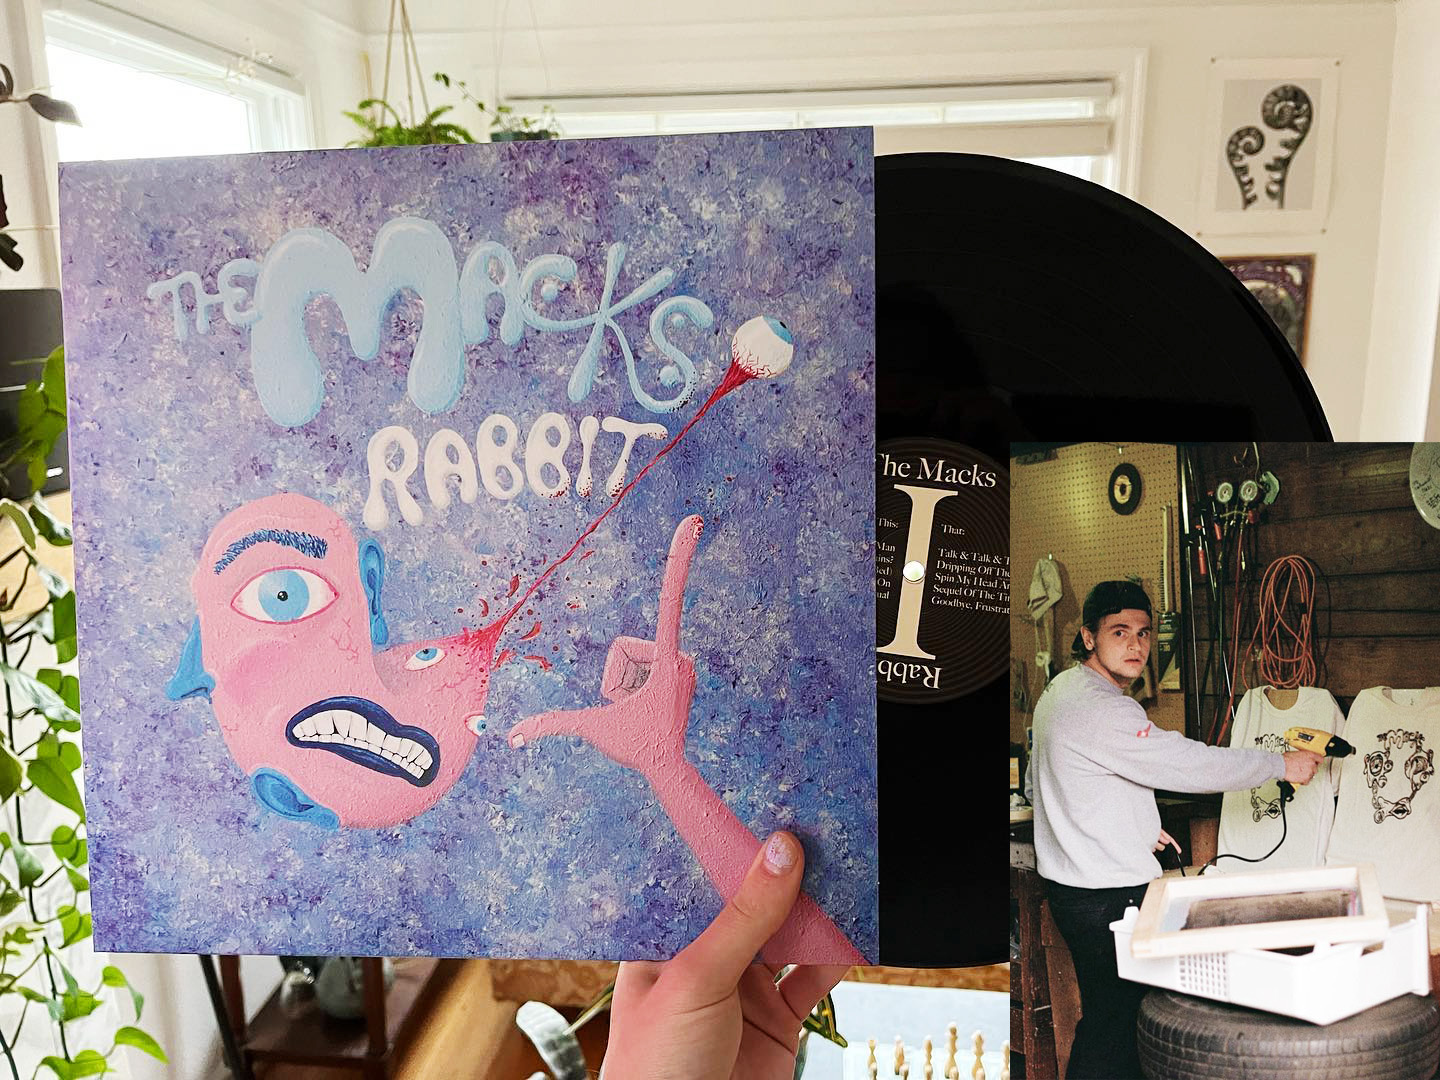 Hand holding up The Macks "Rabbit" vinyl with a small picture of Sam making logo shirts